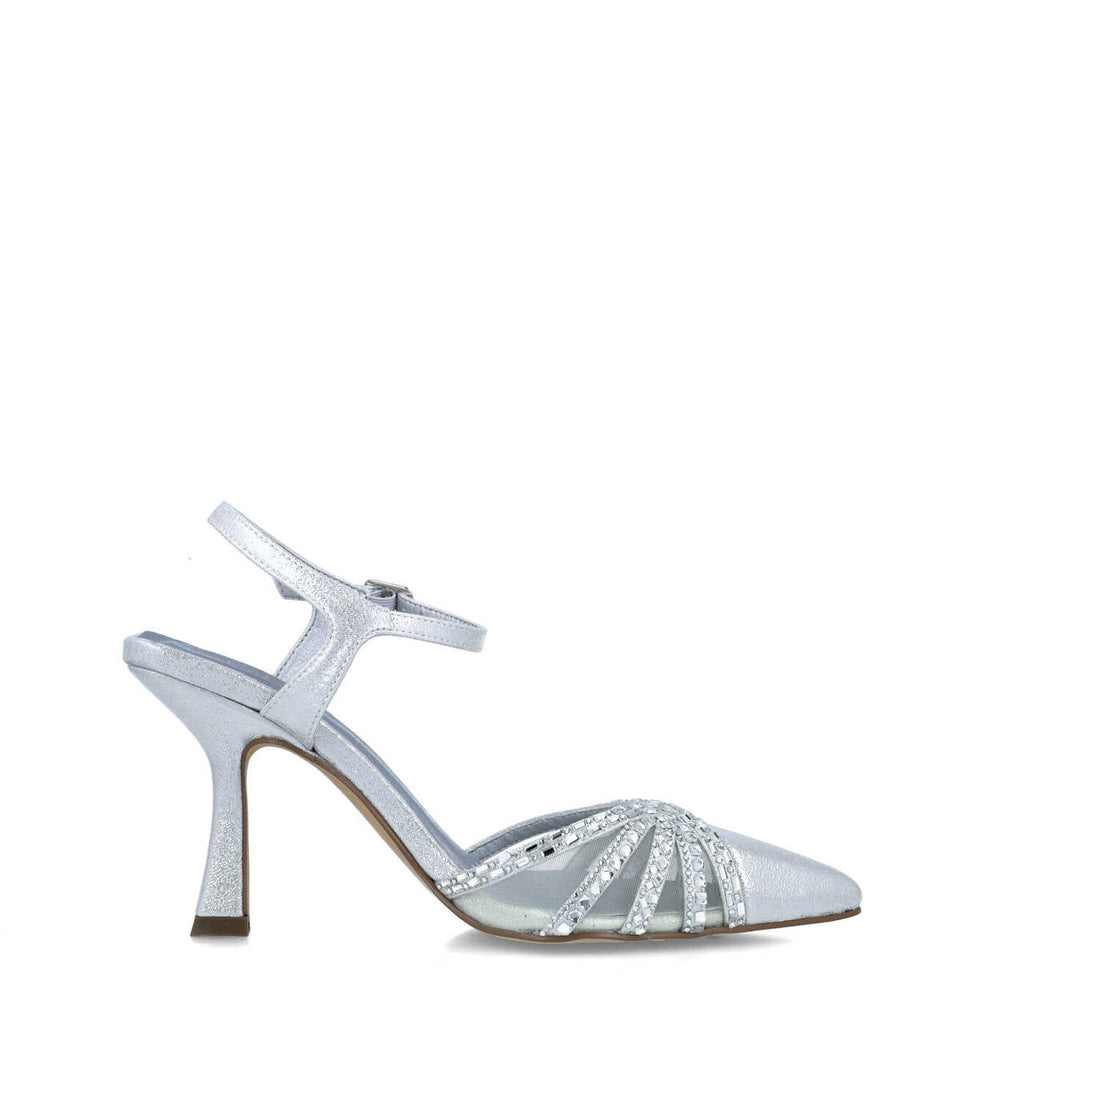 Silver Pumps With Ankle Strap_24734_09_01